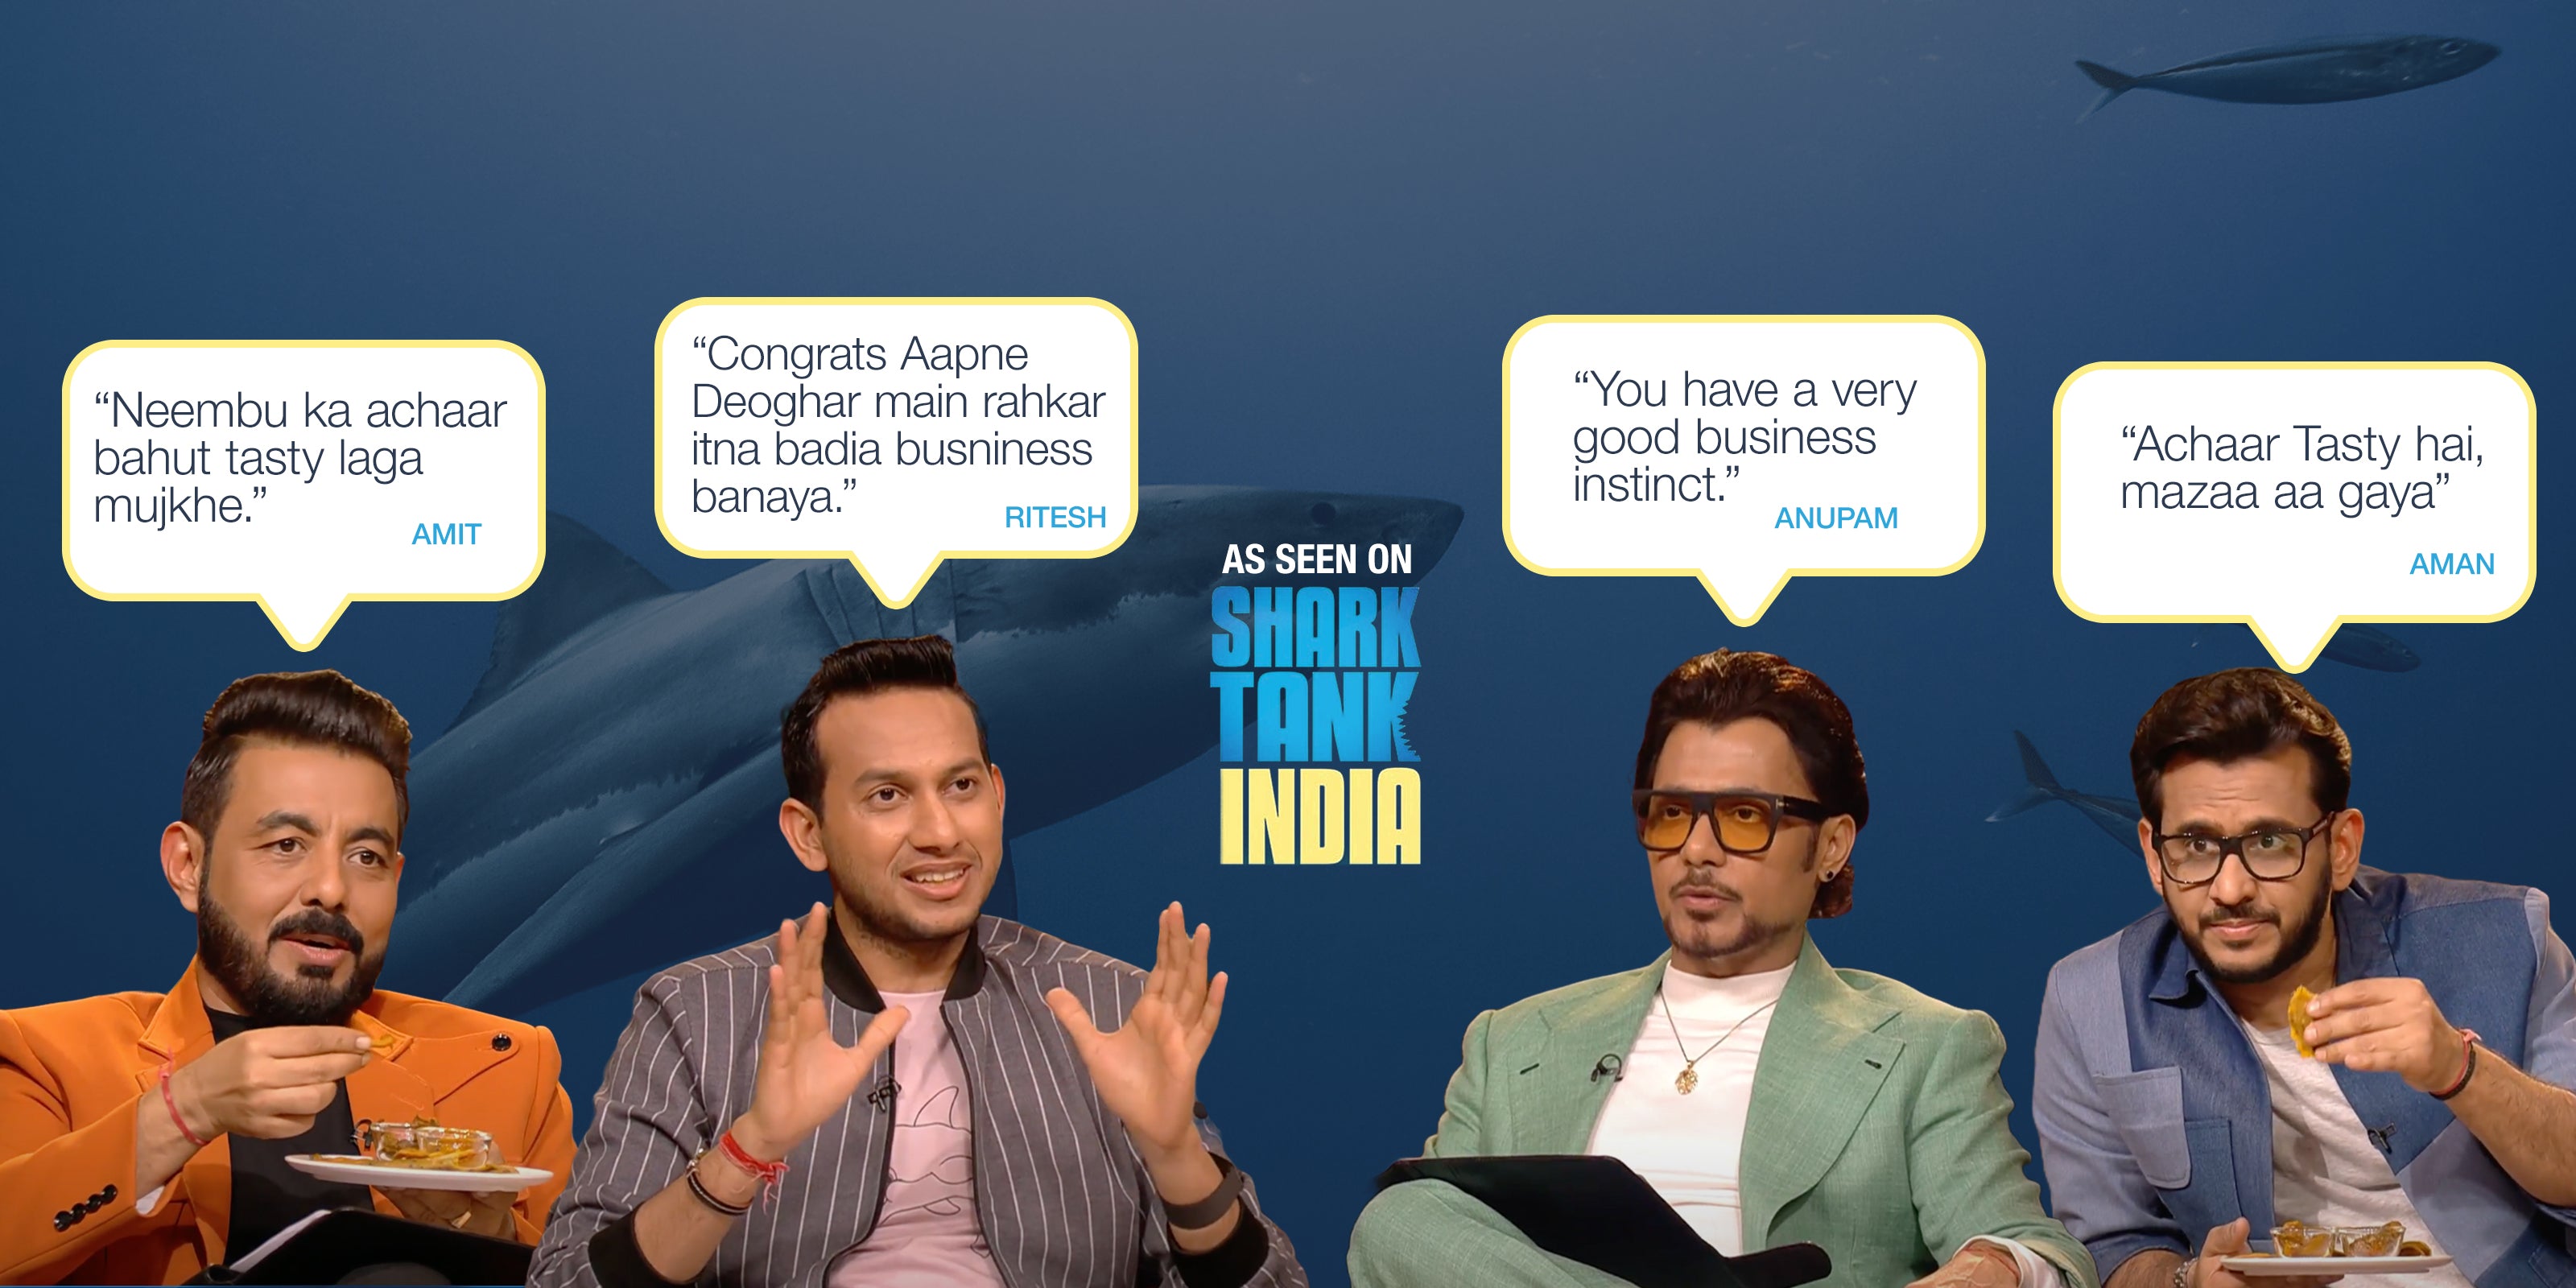 Load video: As Seen on Shark Tank India